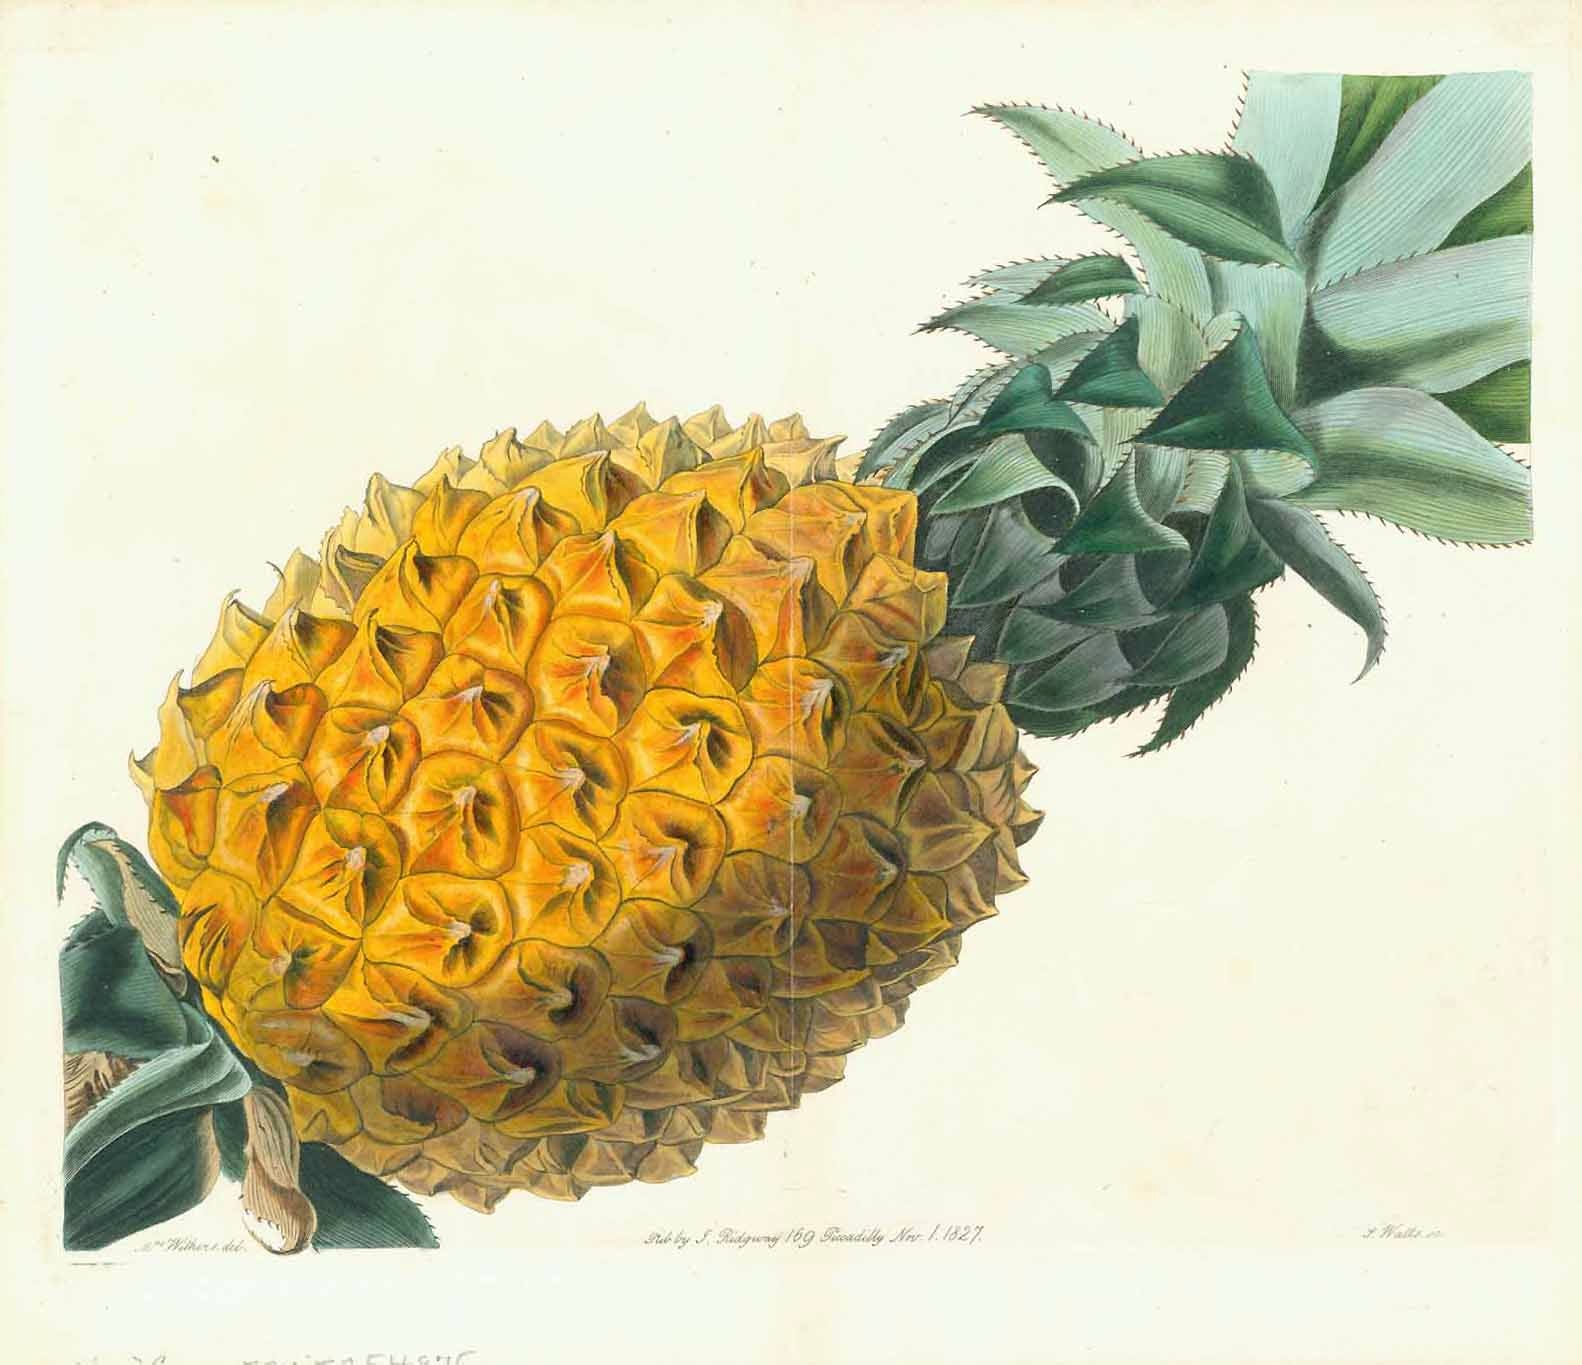 Pineapple Fruit  Copper etching. Rich and beautiful original hand color.  Engraver: John Watts (active 1770-1830)  Drawing by: Honorine Margaret Mabel Withers (1800-1900)  Publisher: Ridgeway  London, dated 1827  Original antique print , interior design, wall decoration, ideas, idea, gift ideas, present, vintage, charming, special, decoration, home interior, living room design